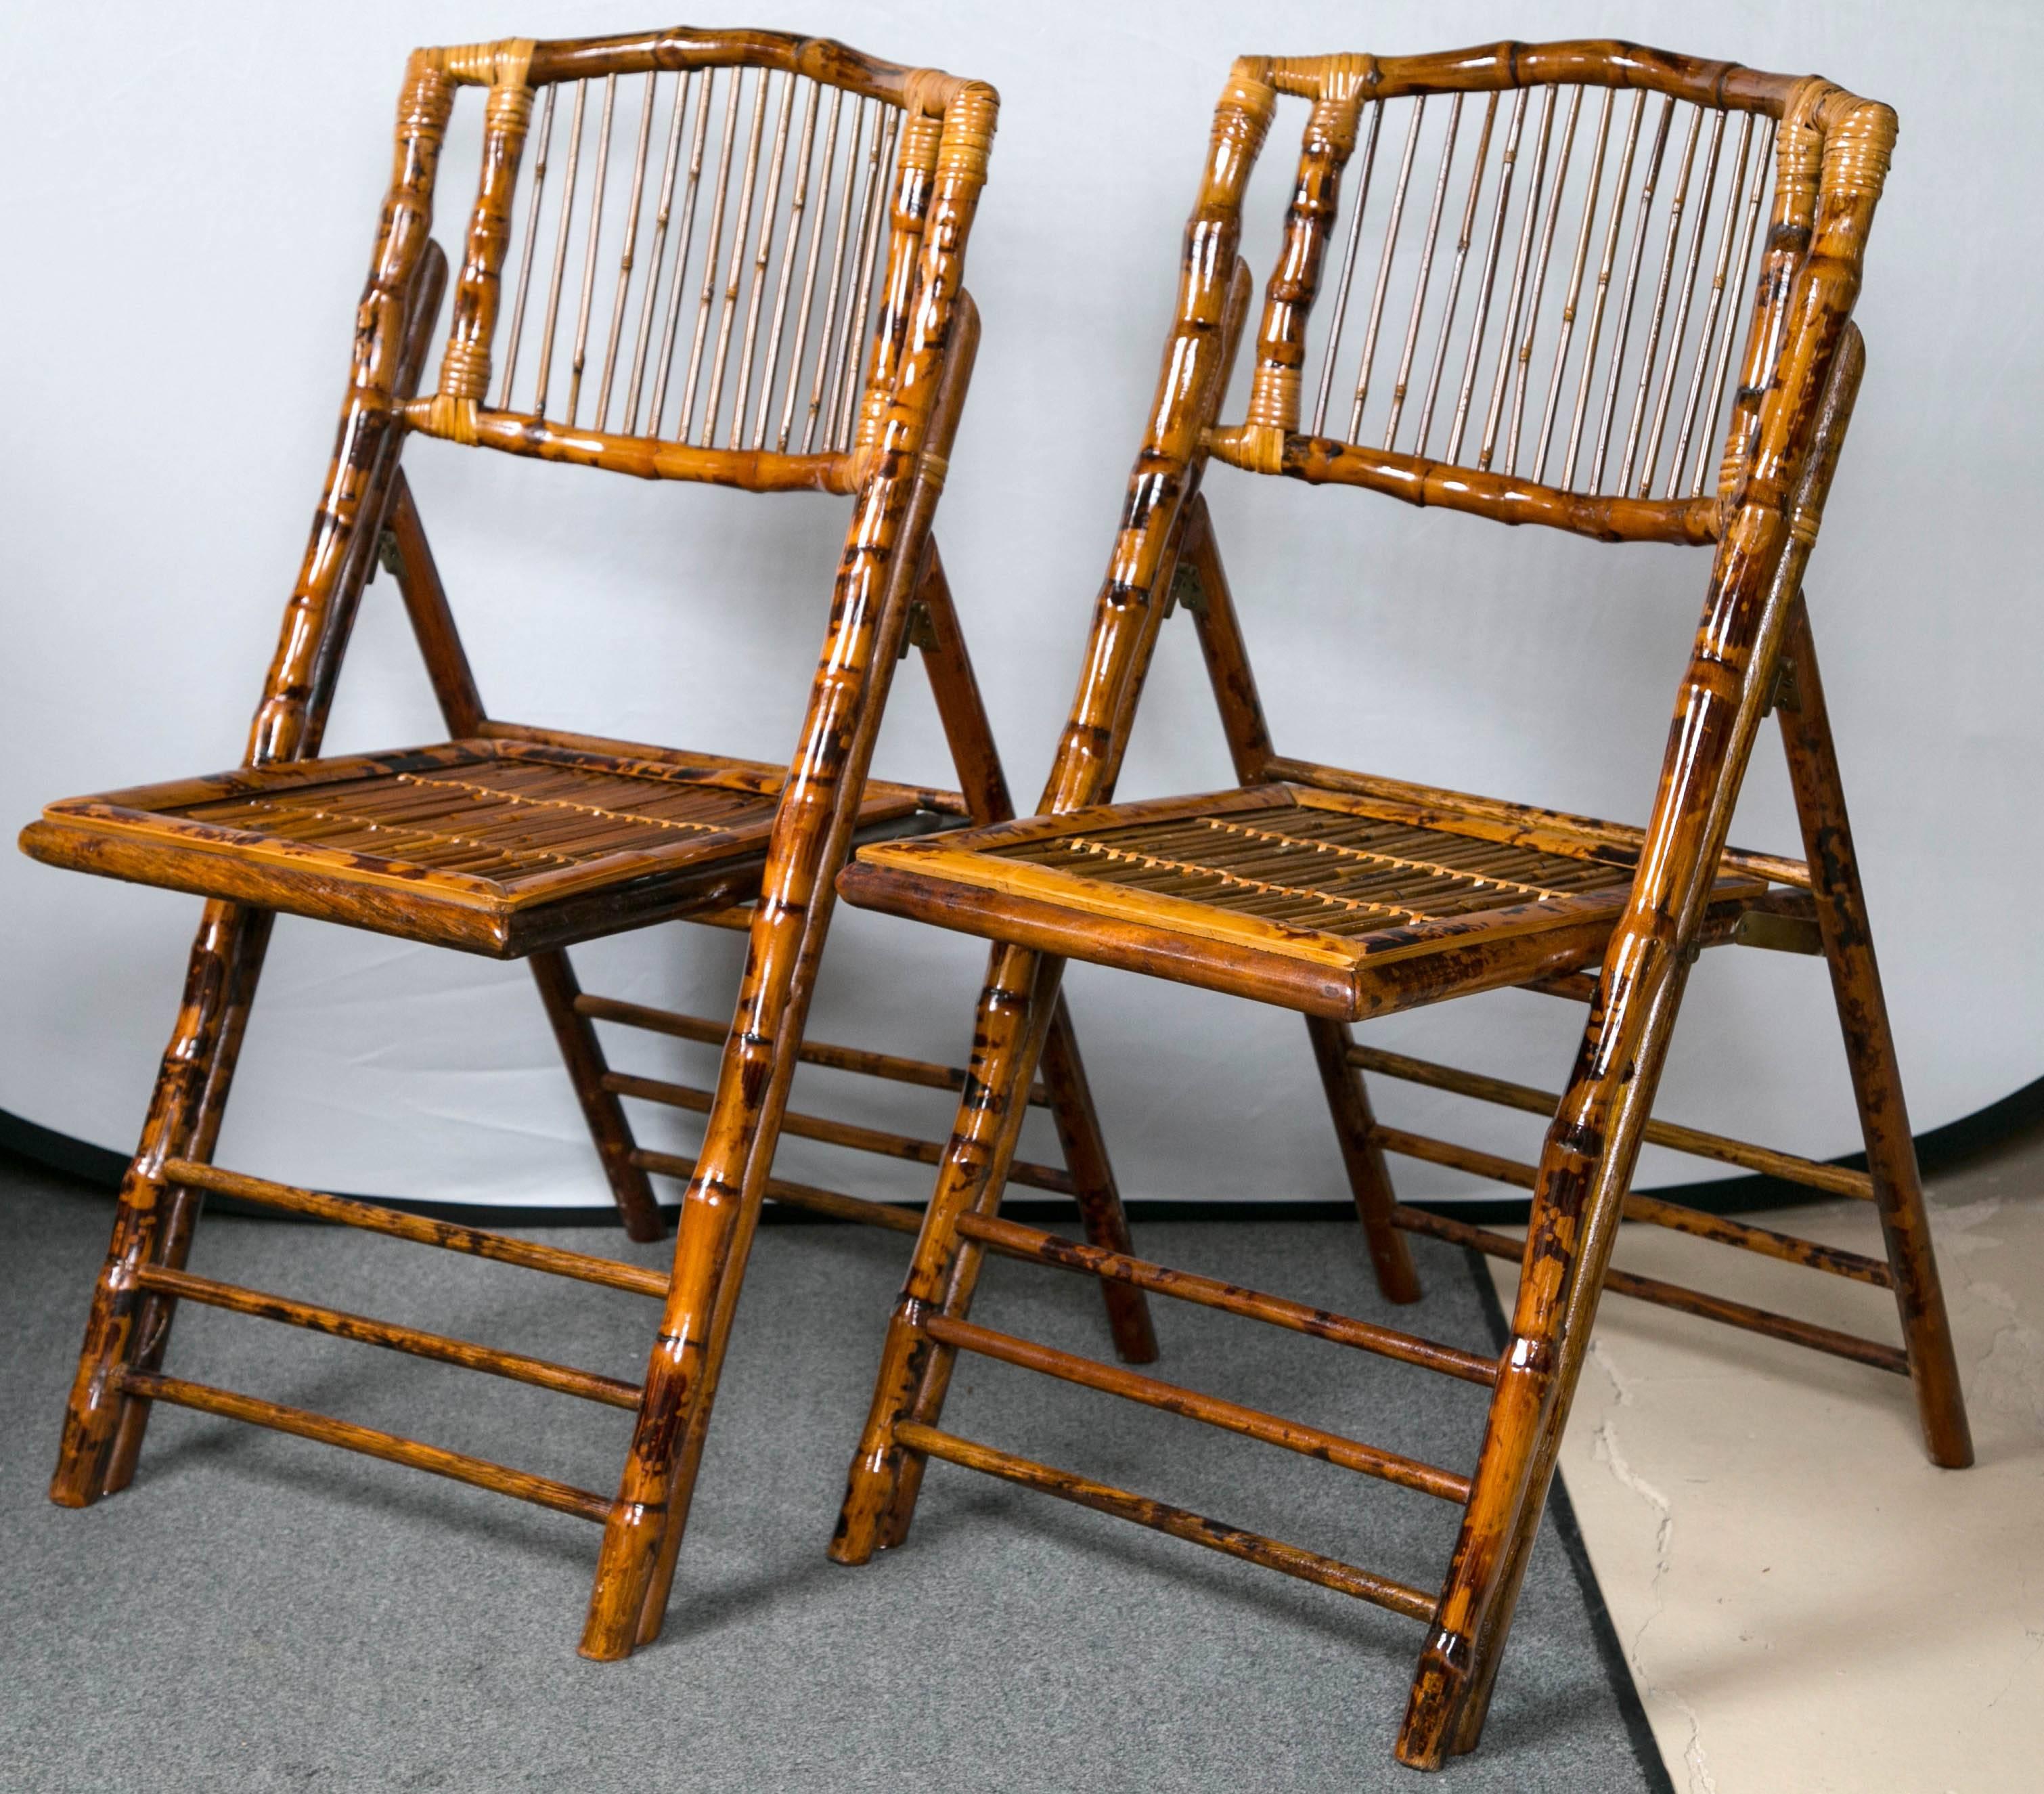 Eight folding tortoise shell and bamboo stylized side chairs. Simply the finest folding side chairs I have ever seen. Each of bamboo form done in a tortoise shell finish with study framed back supports. A wonderful set that would add style to any